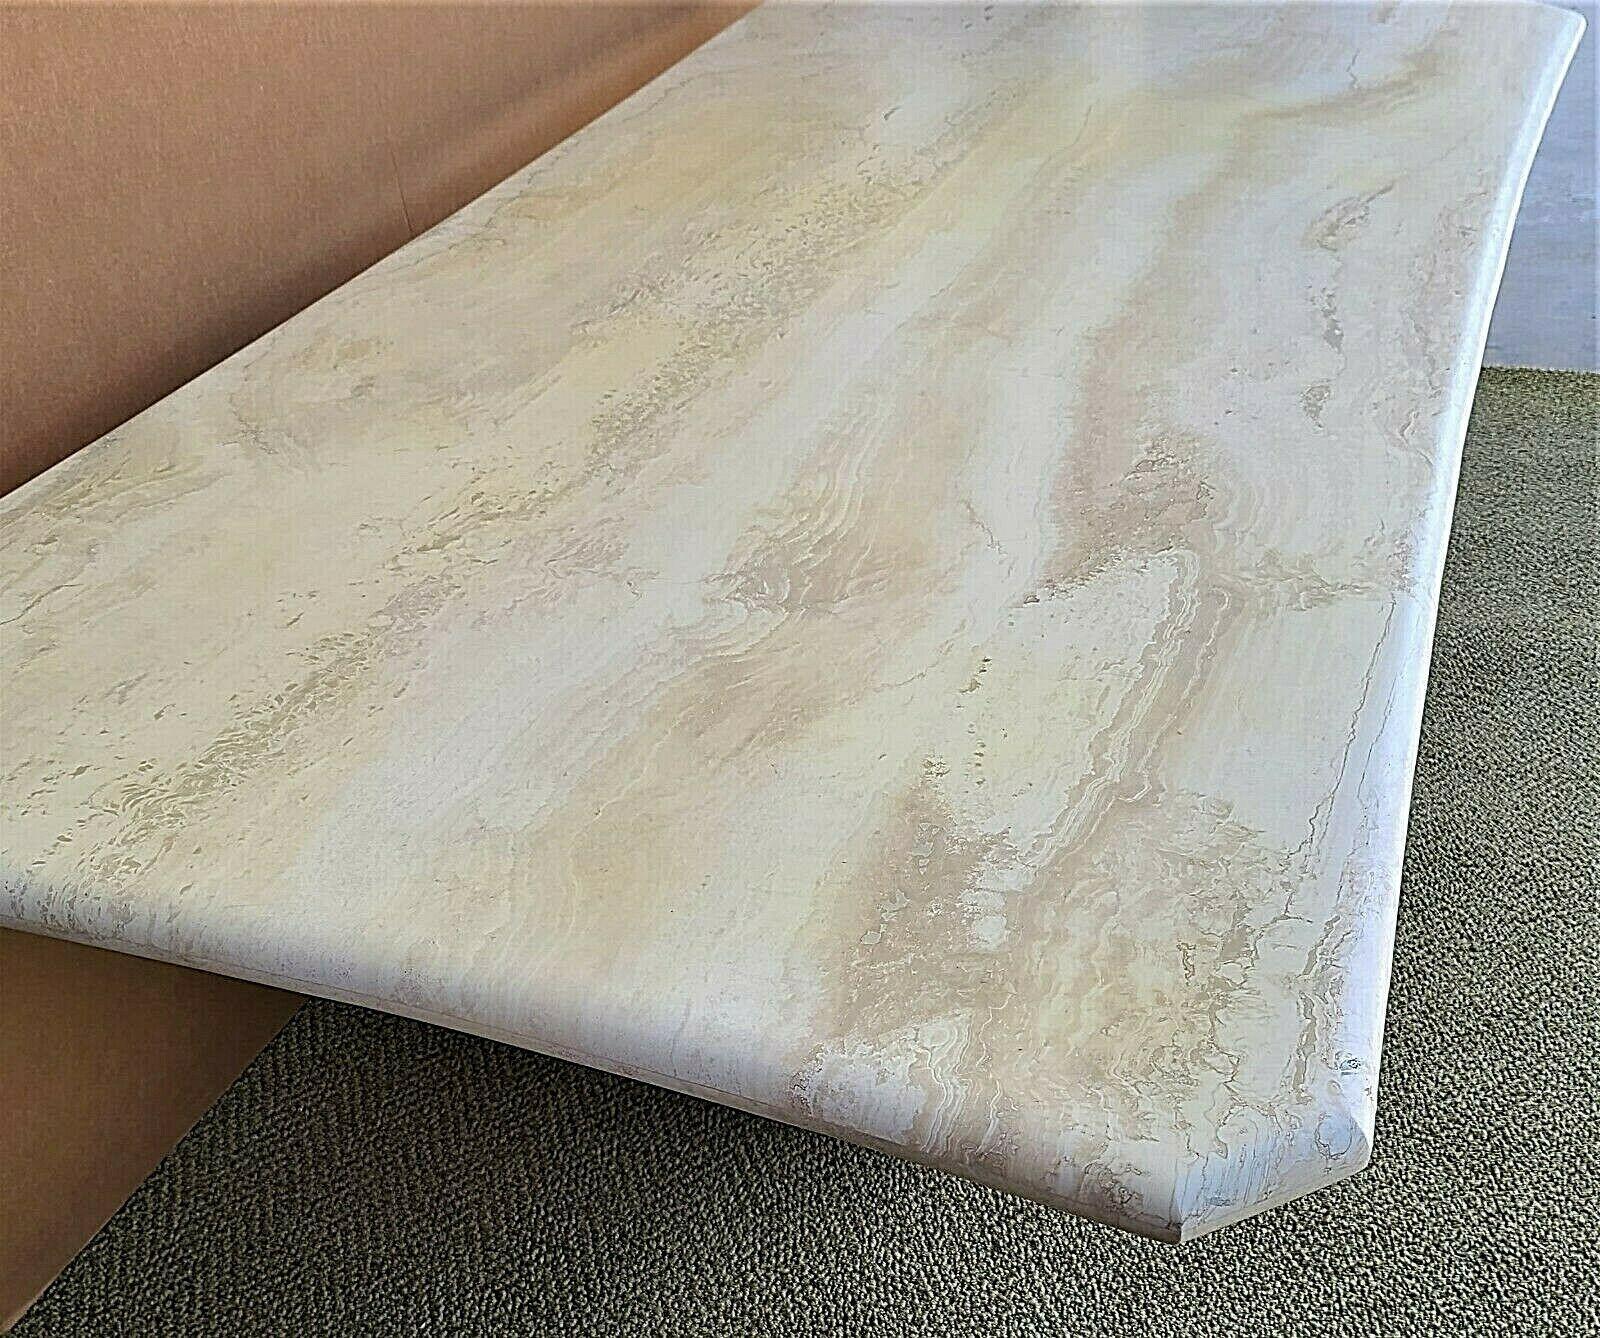 Offering one of our recent palm beach estate fine furniture acquisitions of a 
1970's mcm modern italian sculpted polished travertine marble dining table
seats 8 comfortably.

Approximate measurements in inches
Overall: 29